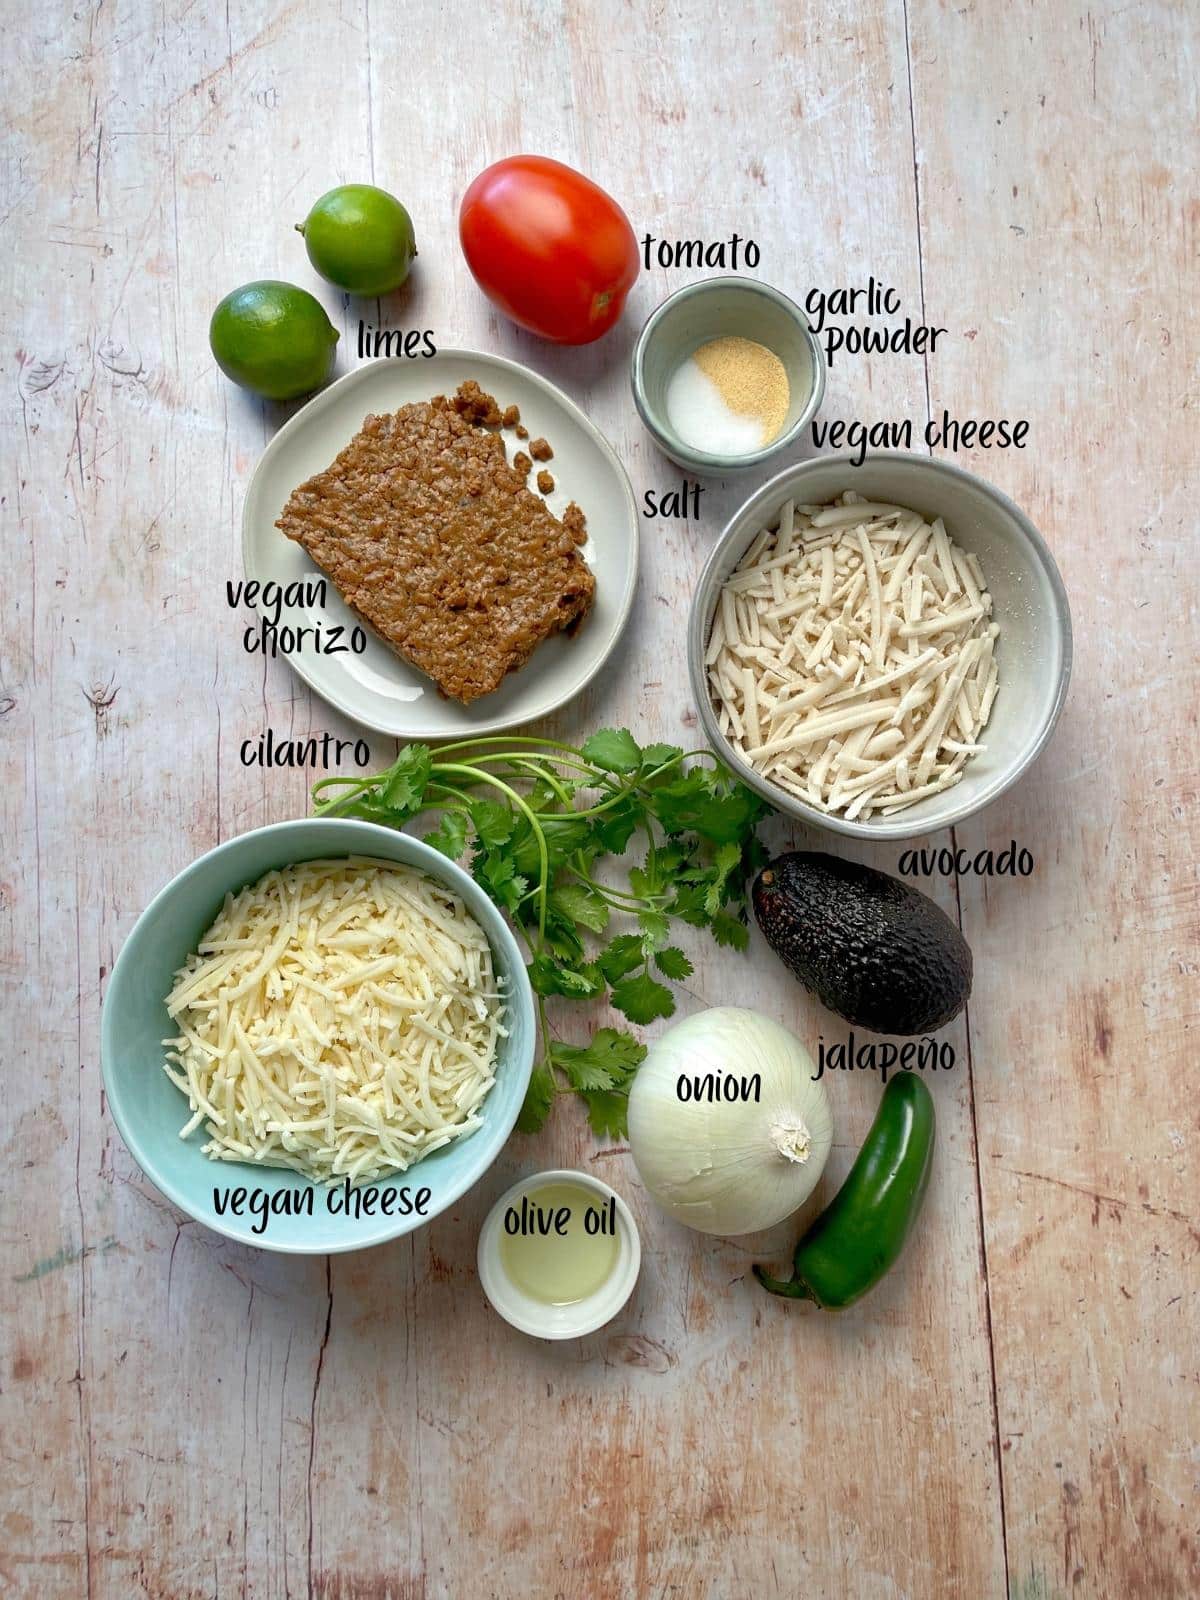 Labeled queso fundido ingredients.